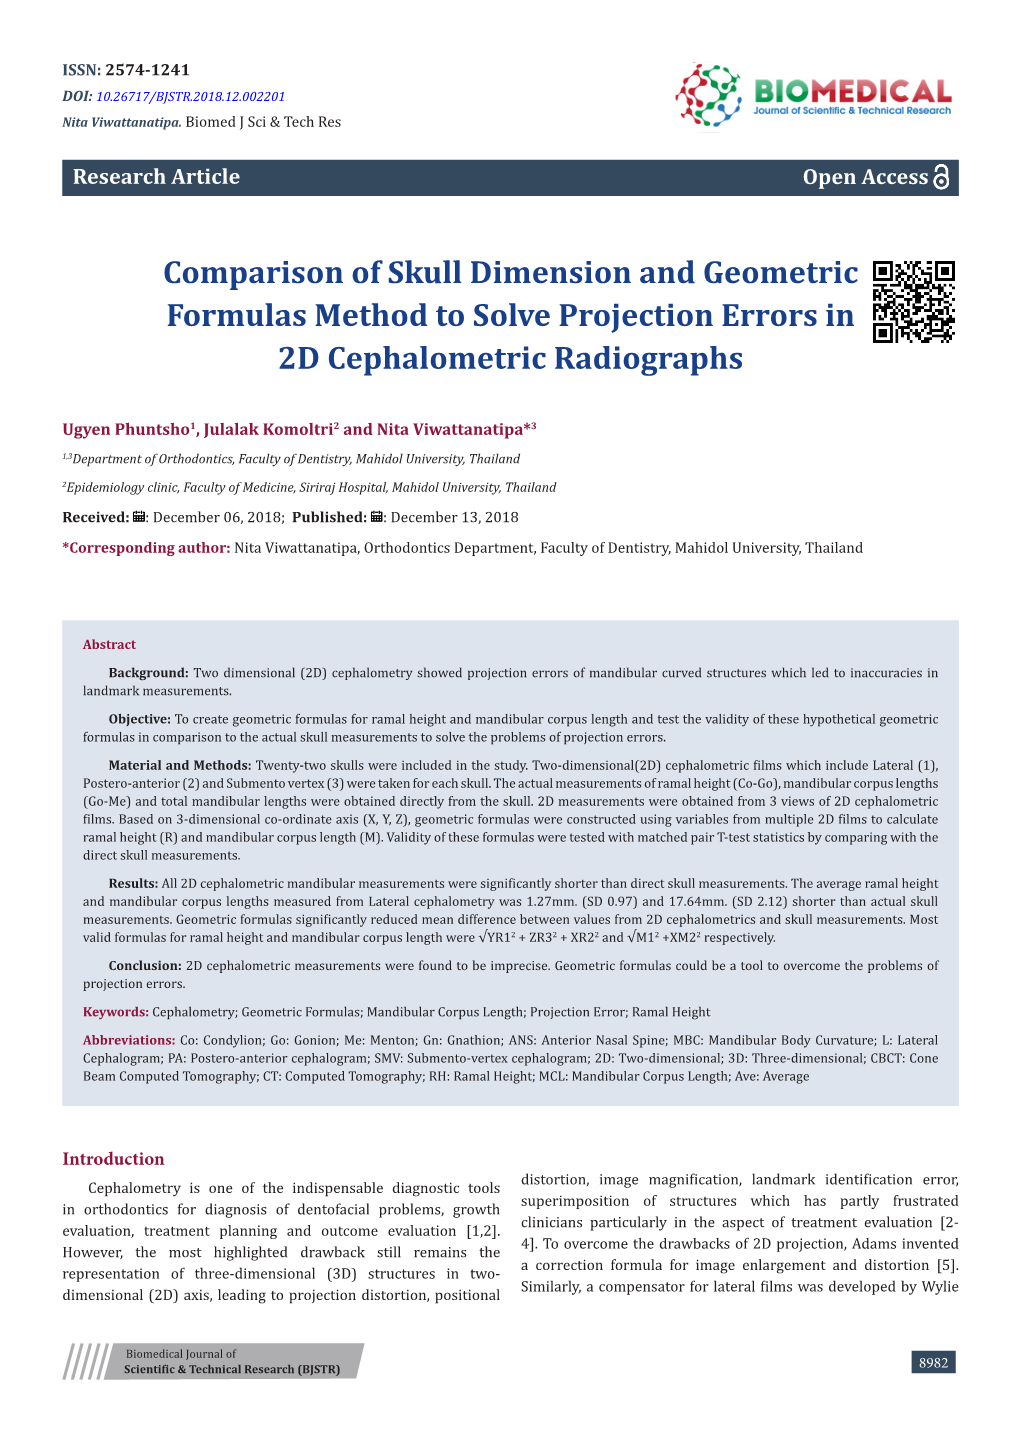 Comparison of Skull Dimension and Geometric Formulas Method to Solve Projection Errors in 2D Cephalometric Radiographs